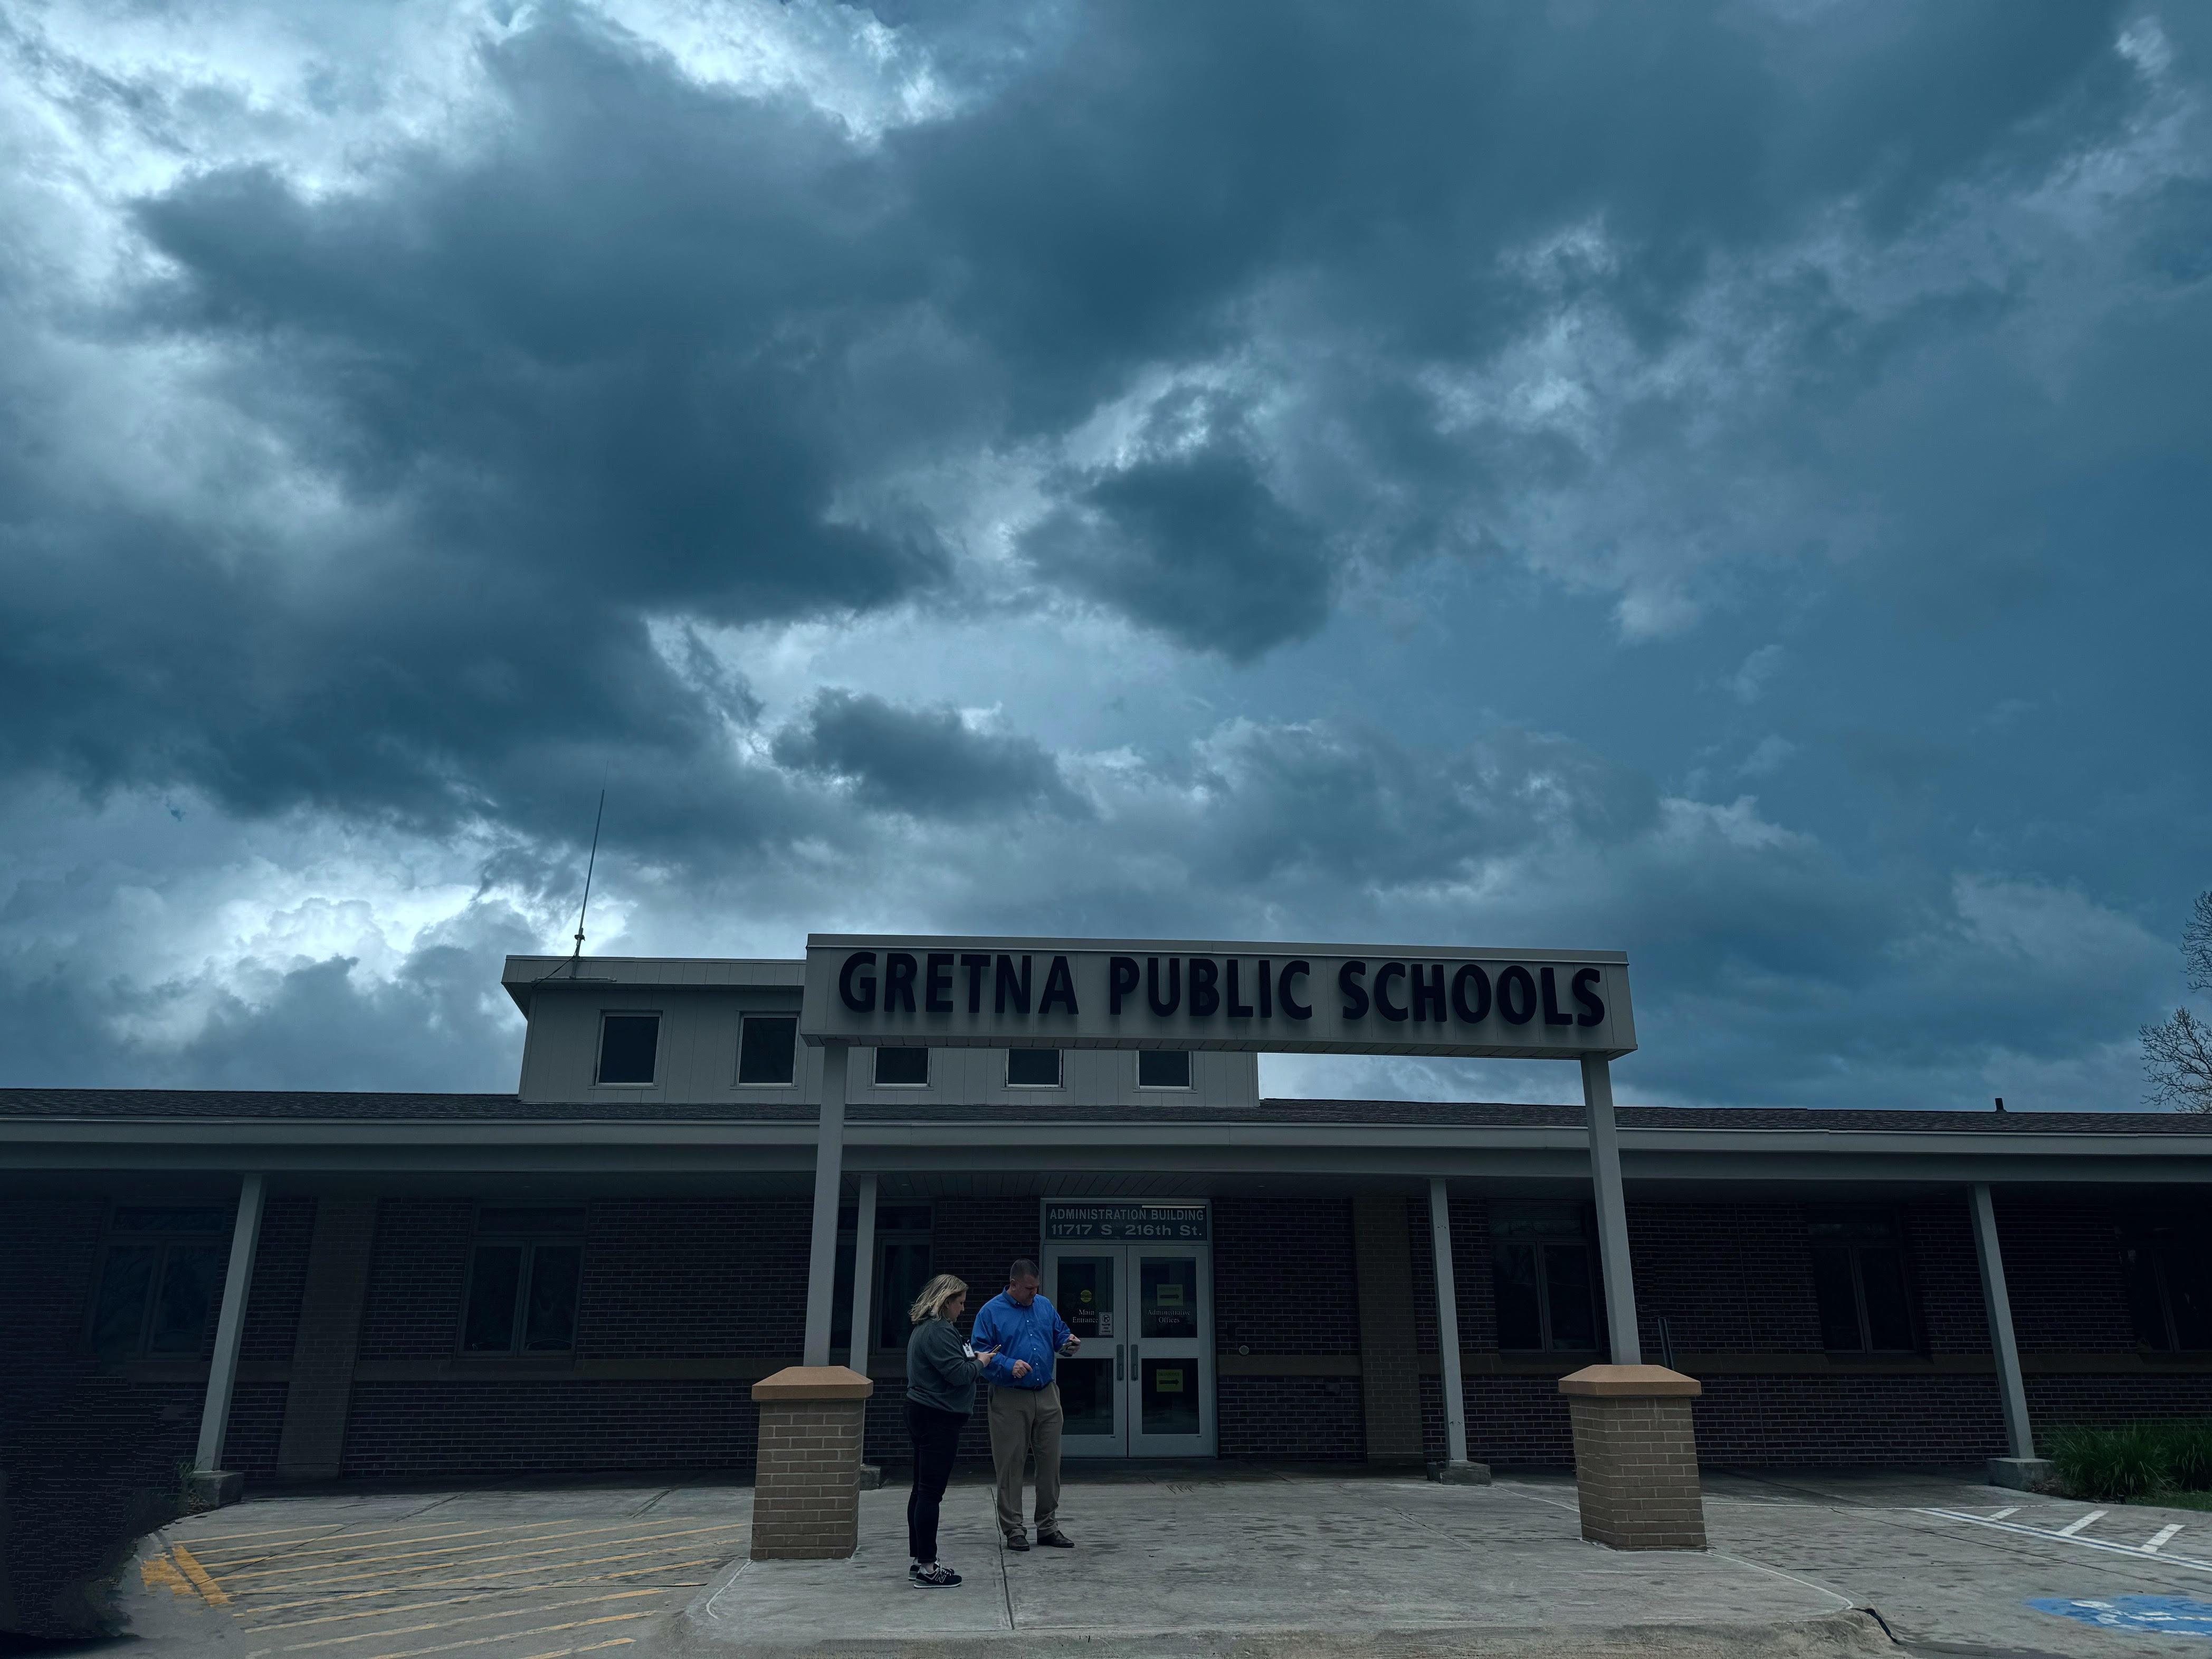 Gretna Public Schools Administration building with storm clouds over the sign.